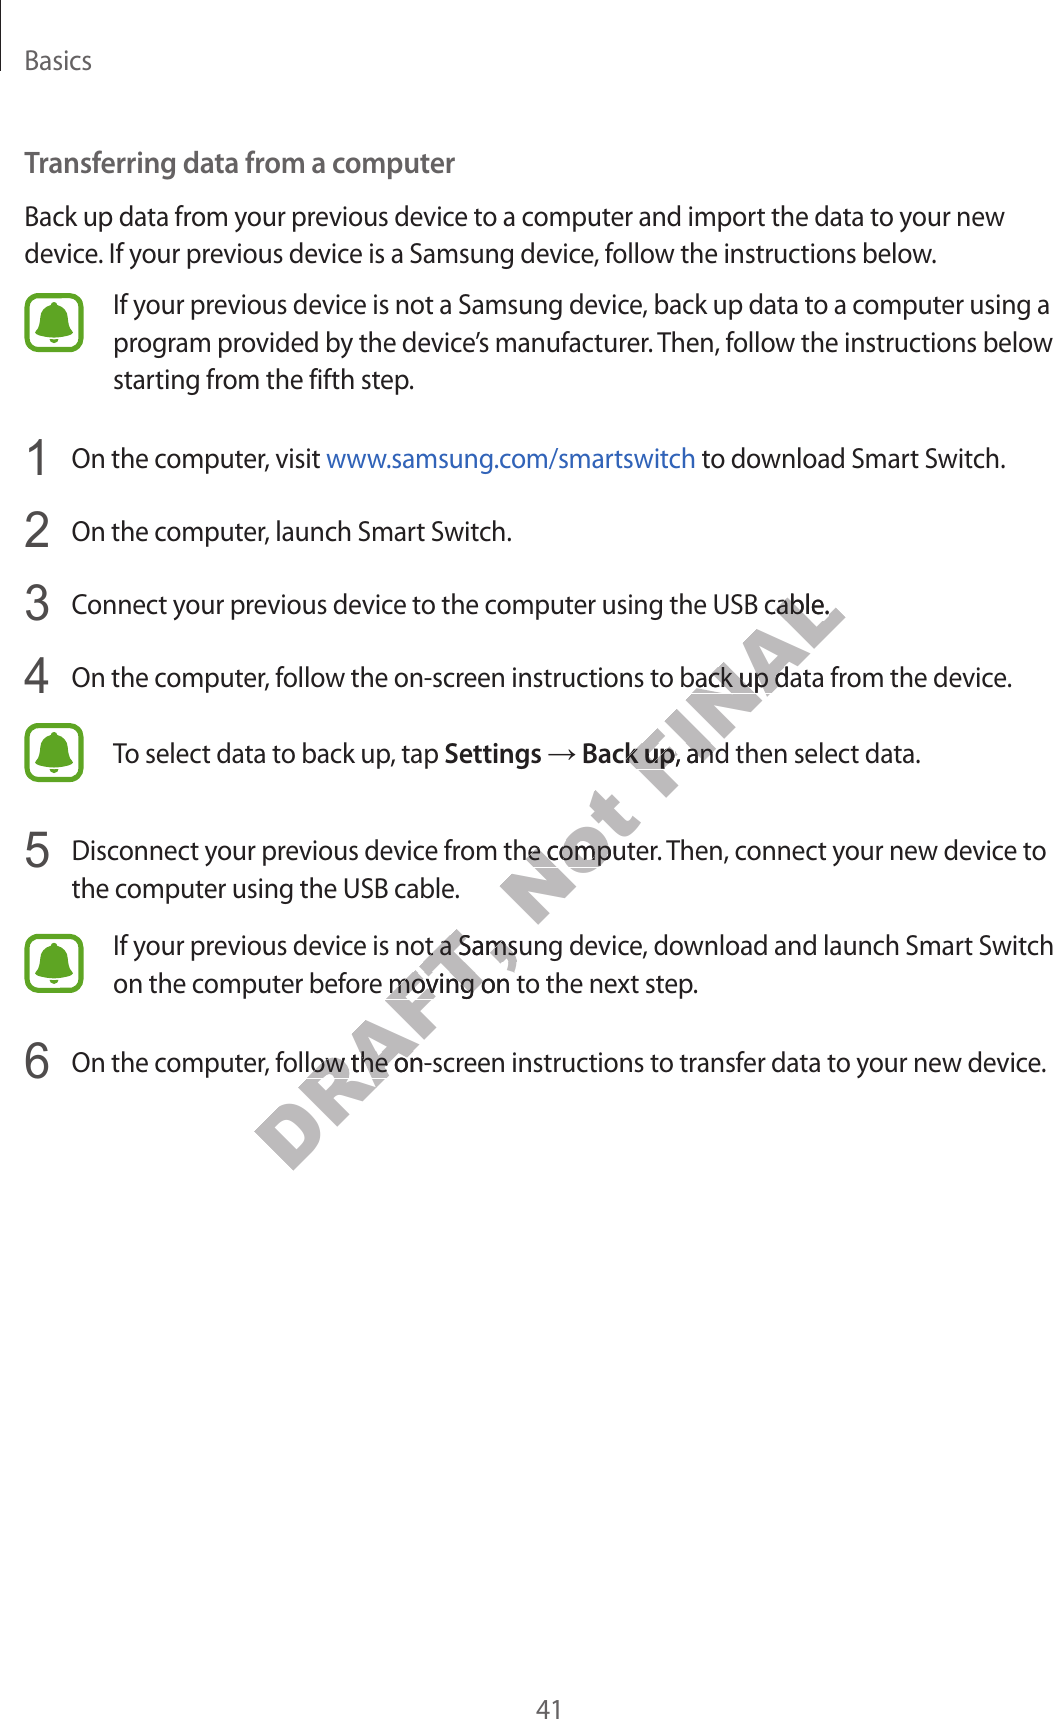 Basics41Transferring data from a computerBack up data from your previous device to a computer and import the data to your new device. If your previous device is a Samsung device, follow the instructions below.If your previous device is not a Samsung device, back up data to a computer using a program provided by the device’s manufacturer. Then, follow the instructions below starting from the fifth step.1  On the computer, visit www.samsung.com/smartswitch to download Smart Switch.2  On the computer, launch Smart Switch.3  Connect your previous device to the computer using the USB cable.4  On the computer, follow the on-screen instructions to back up data from the device.To select data to back up, tap Settings → Back up, and then select data.5  Disconnect your previous device from the computer. Then, connect your new device to the computer using the USB cable.If your previous device is not a Samsung device, download and launch Smart Switch on the computer before moving on to the next step.6  On the computer, follow the on-screen instructions to transfer data to your new device.DRAFT, e is not a Samsung device is not a Samsung devicore moving on tore moving on t, follow the on-scr, follow the on-scrNot om the computom the computFINALer using the USB cable.er using the USB cable.o back up dao back up daack upack up, and then selec, and then selec